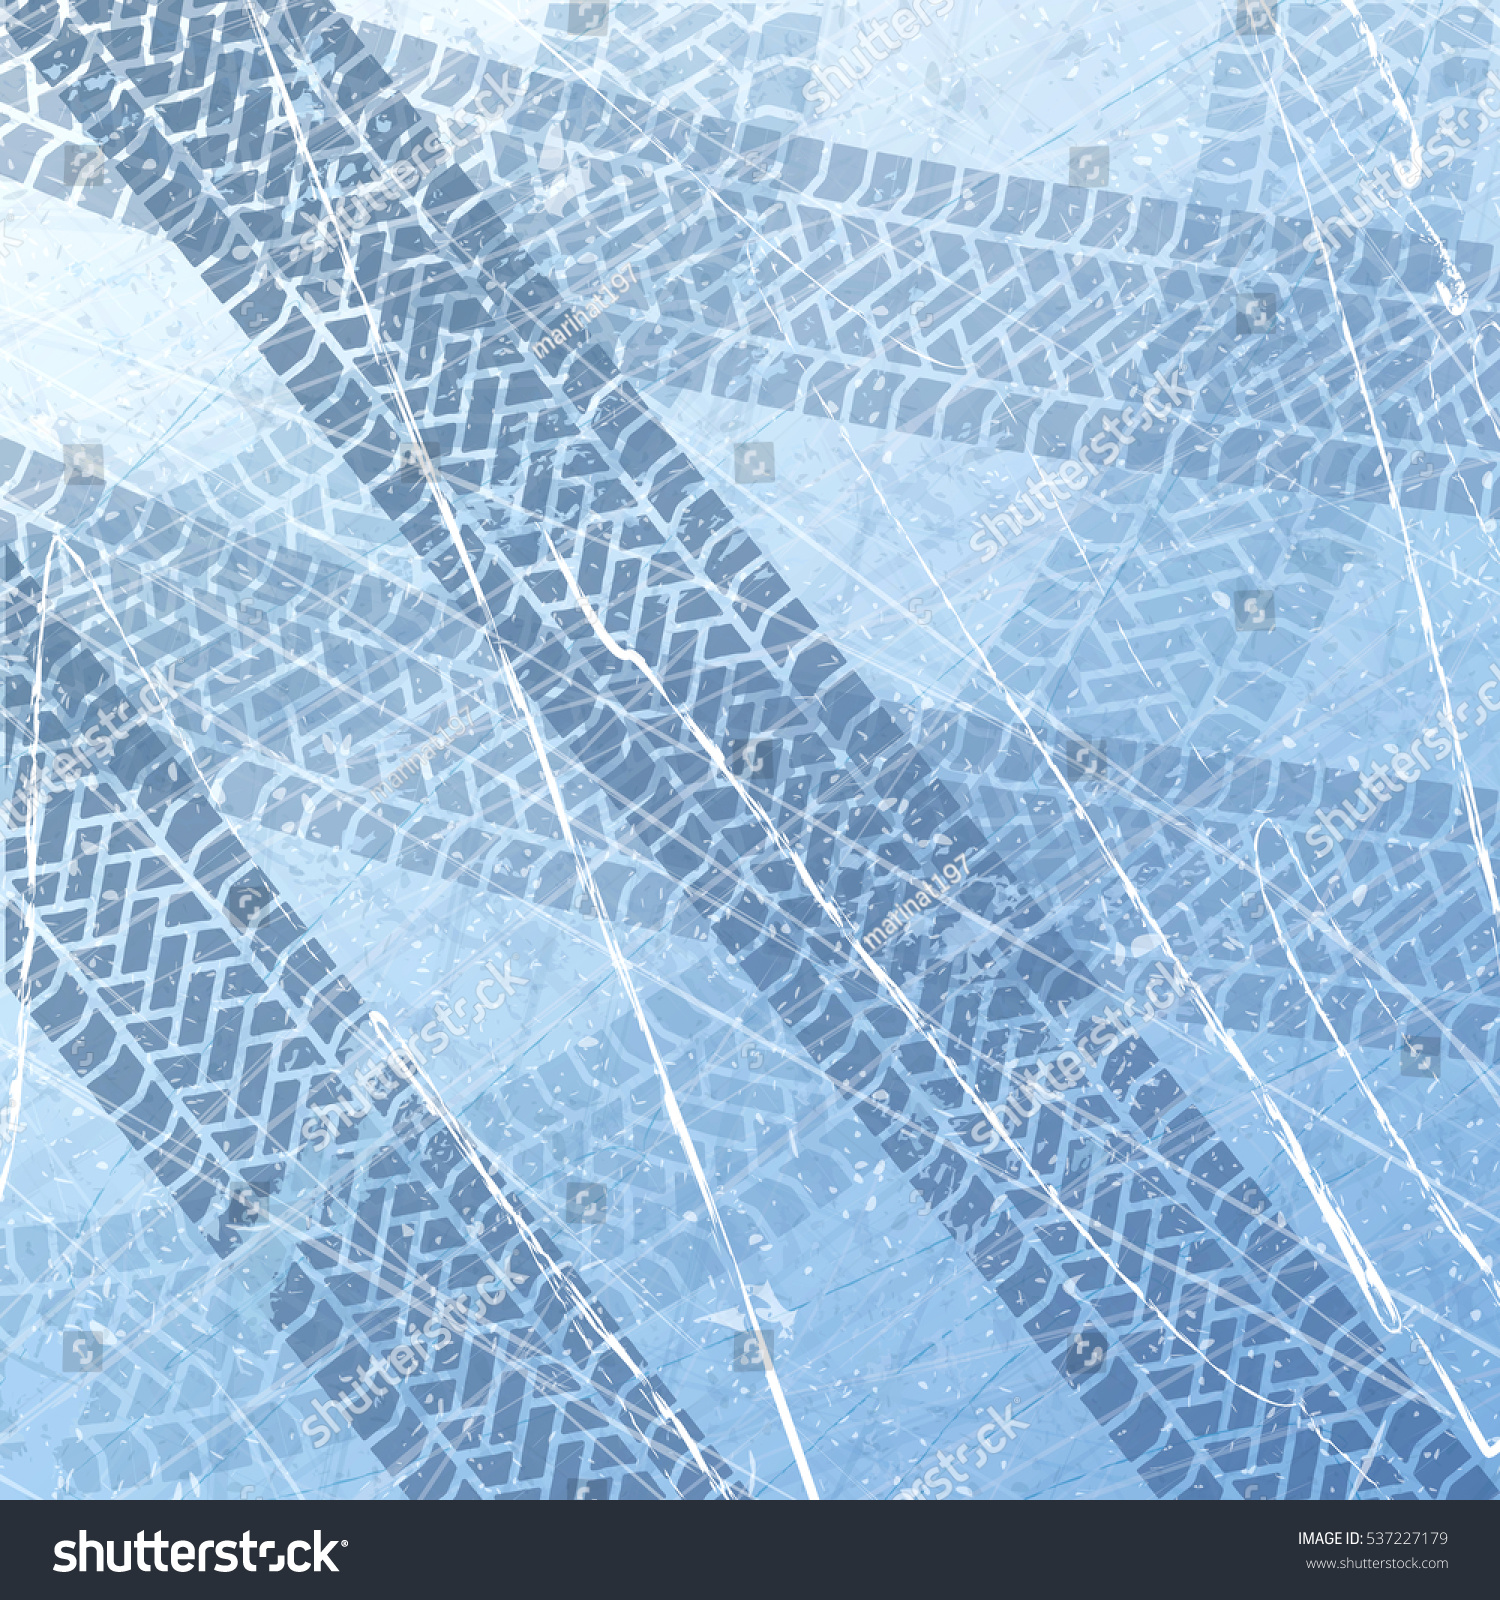 Traces Car Tires On Ice Texture Stock Vector 537227179 - Shutterstock